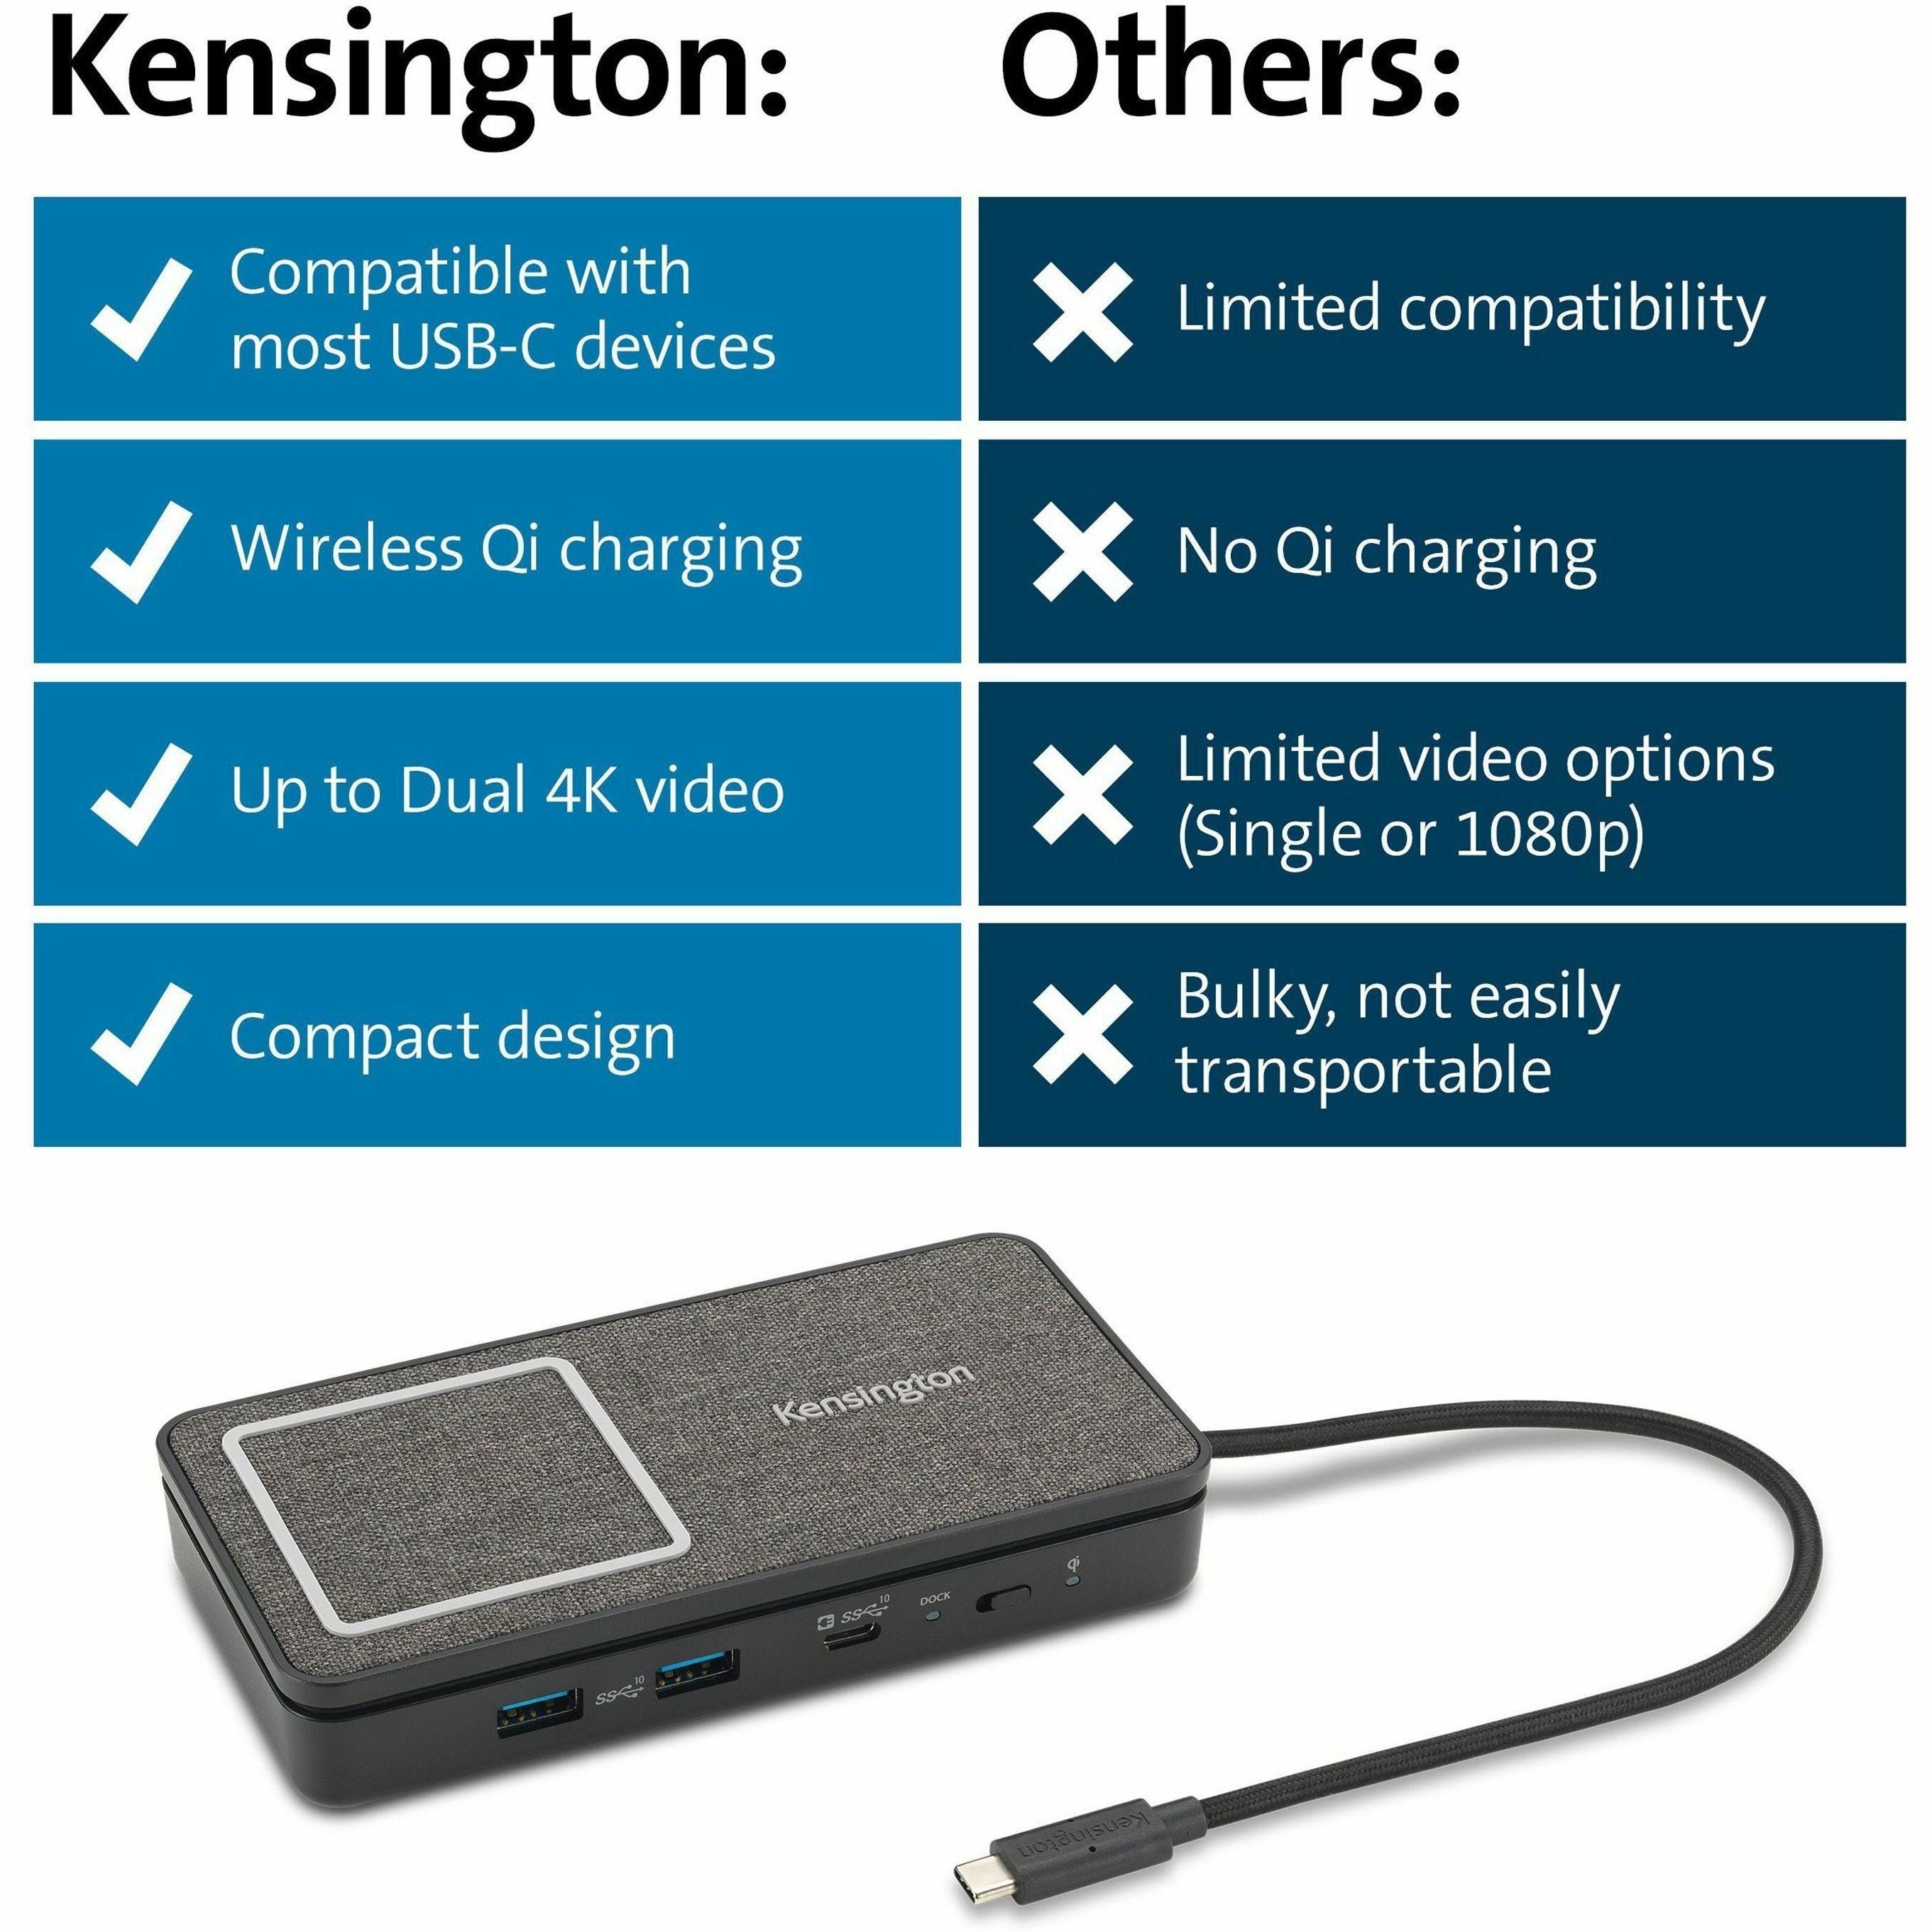 kensington-usb-c-dual-4k-portable-mobile-dock-for-notebook-tablet-smartphone-monitor-usb-type-c-2-displays-supported-4k-3840-x-2160-usb-type-c-network-rj-45-hdmi-black-wired-ethernet-85w-portable_kmw32800 - 5